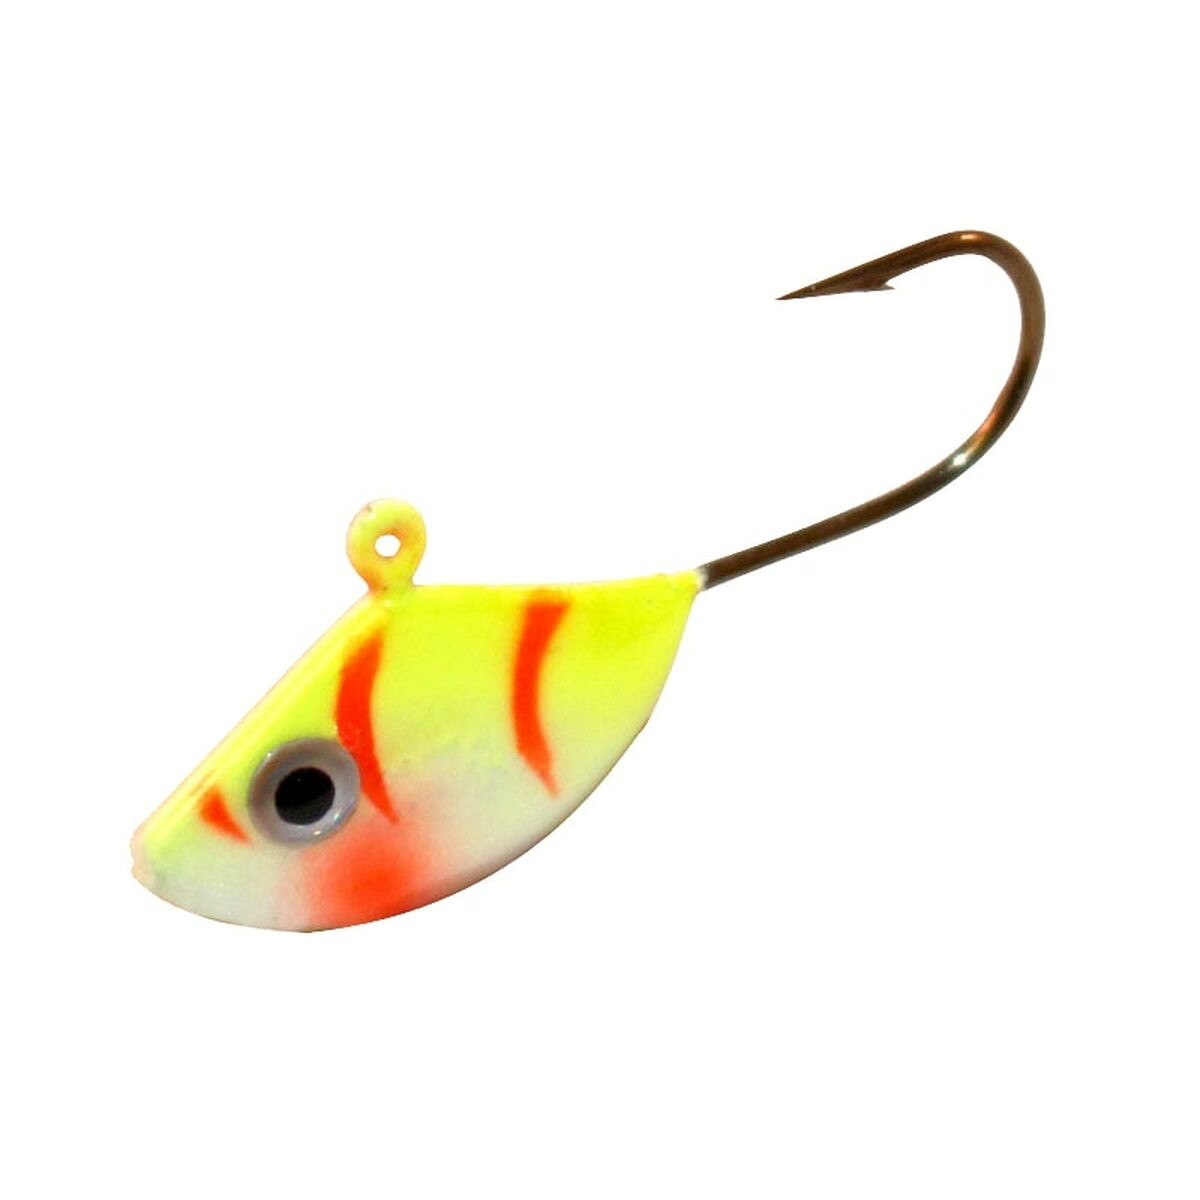 https://op2.0ps.us/original/opplanet-northland-fishing-tackle-uv-forage-minnow-jig-electric-perch-1-16-oz-fmuvj8-60-main